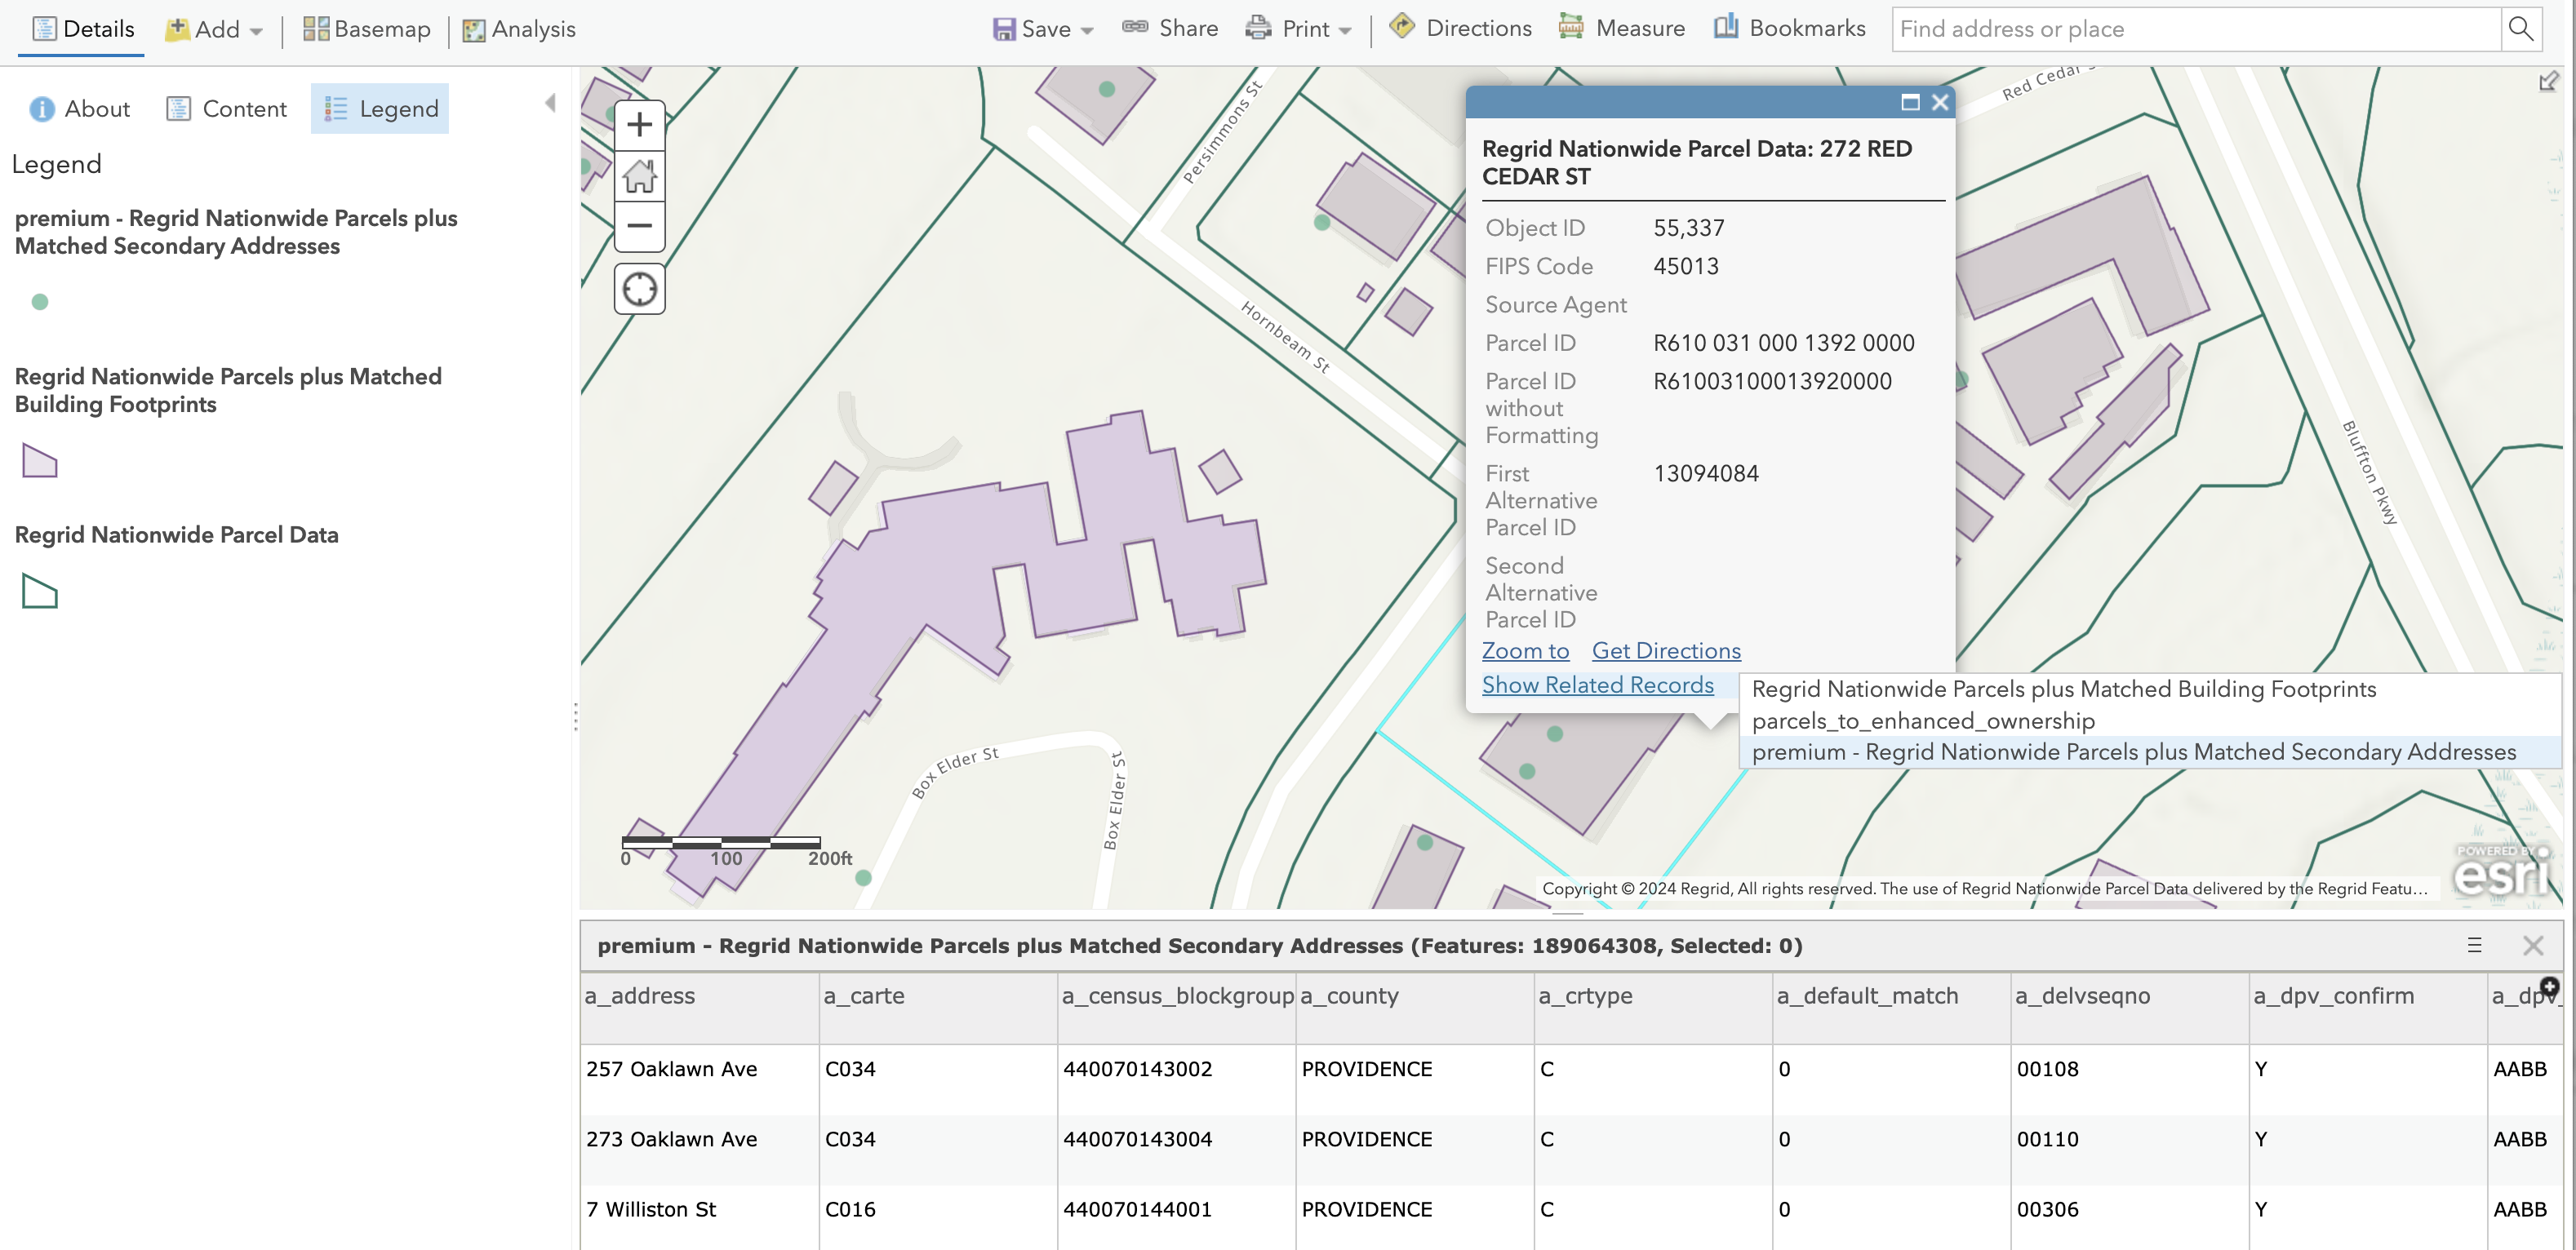 Example of viewing Matched Secondary Addresses for a parcel via the Show Related Records link in the popup. The selected parcel has 3 matched addresses.